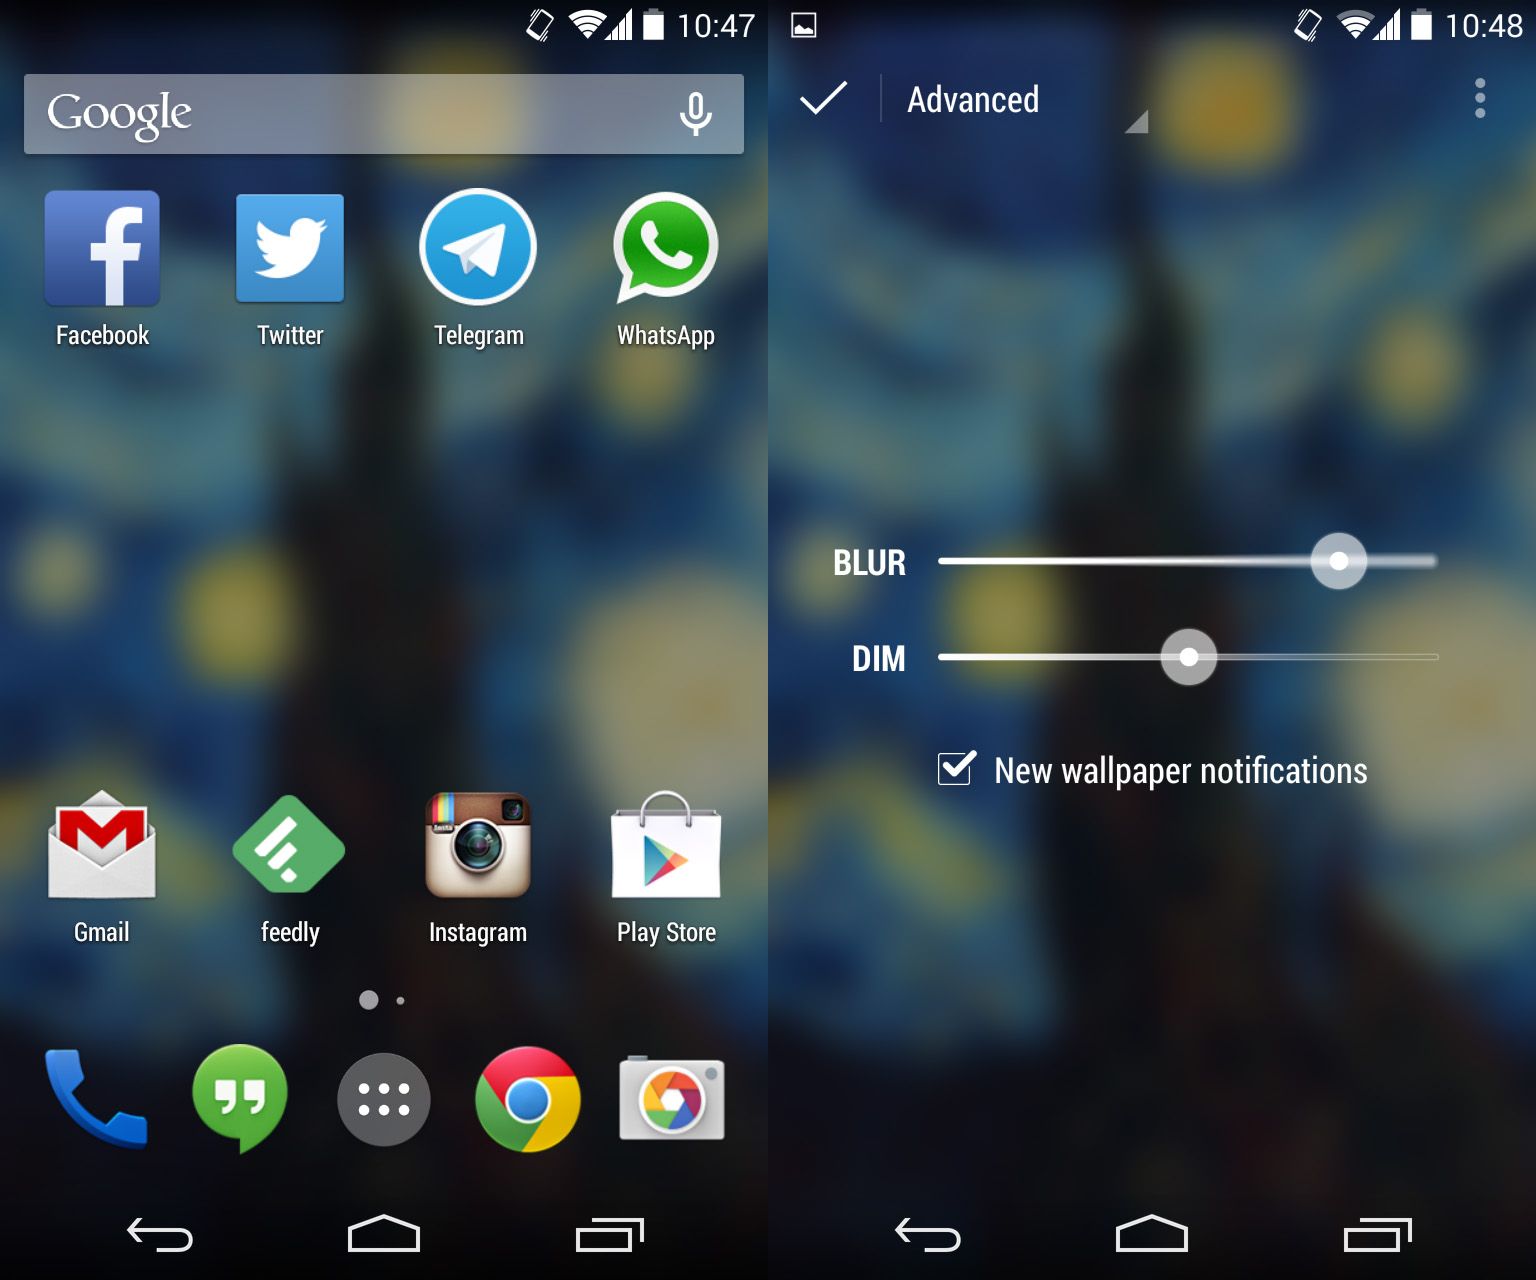 muzei screenshot 2 Apps to find Android wallpapers